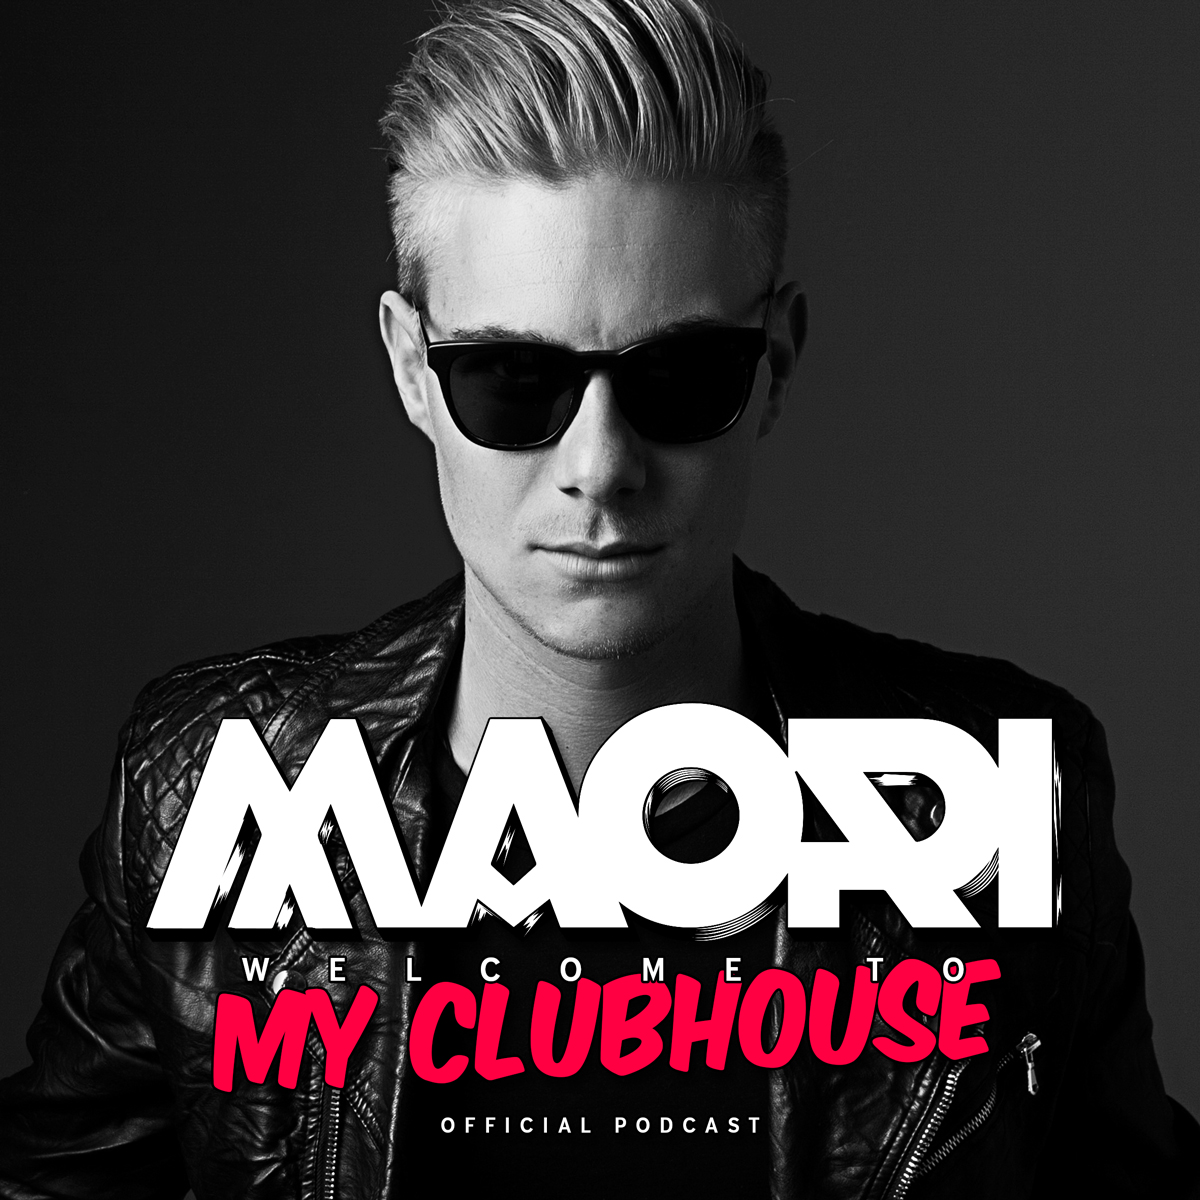 My Clubhouse by Maori - Podcast #028